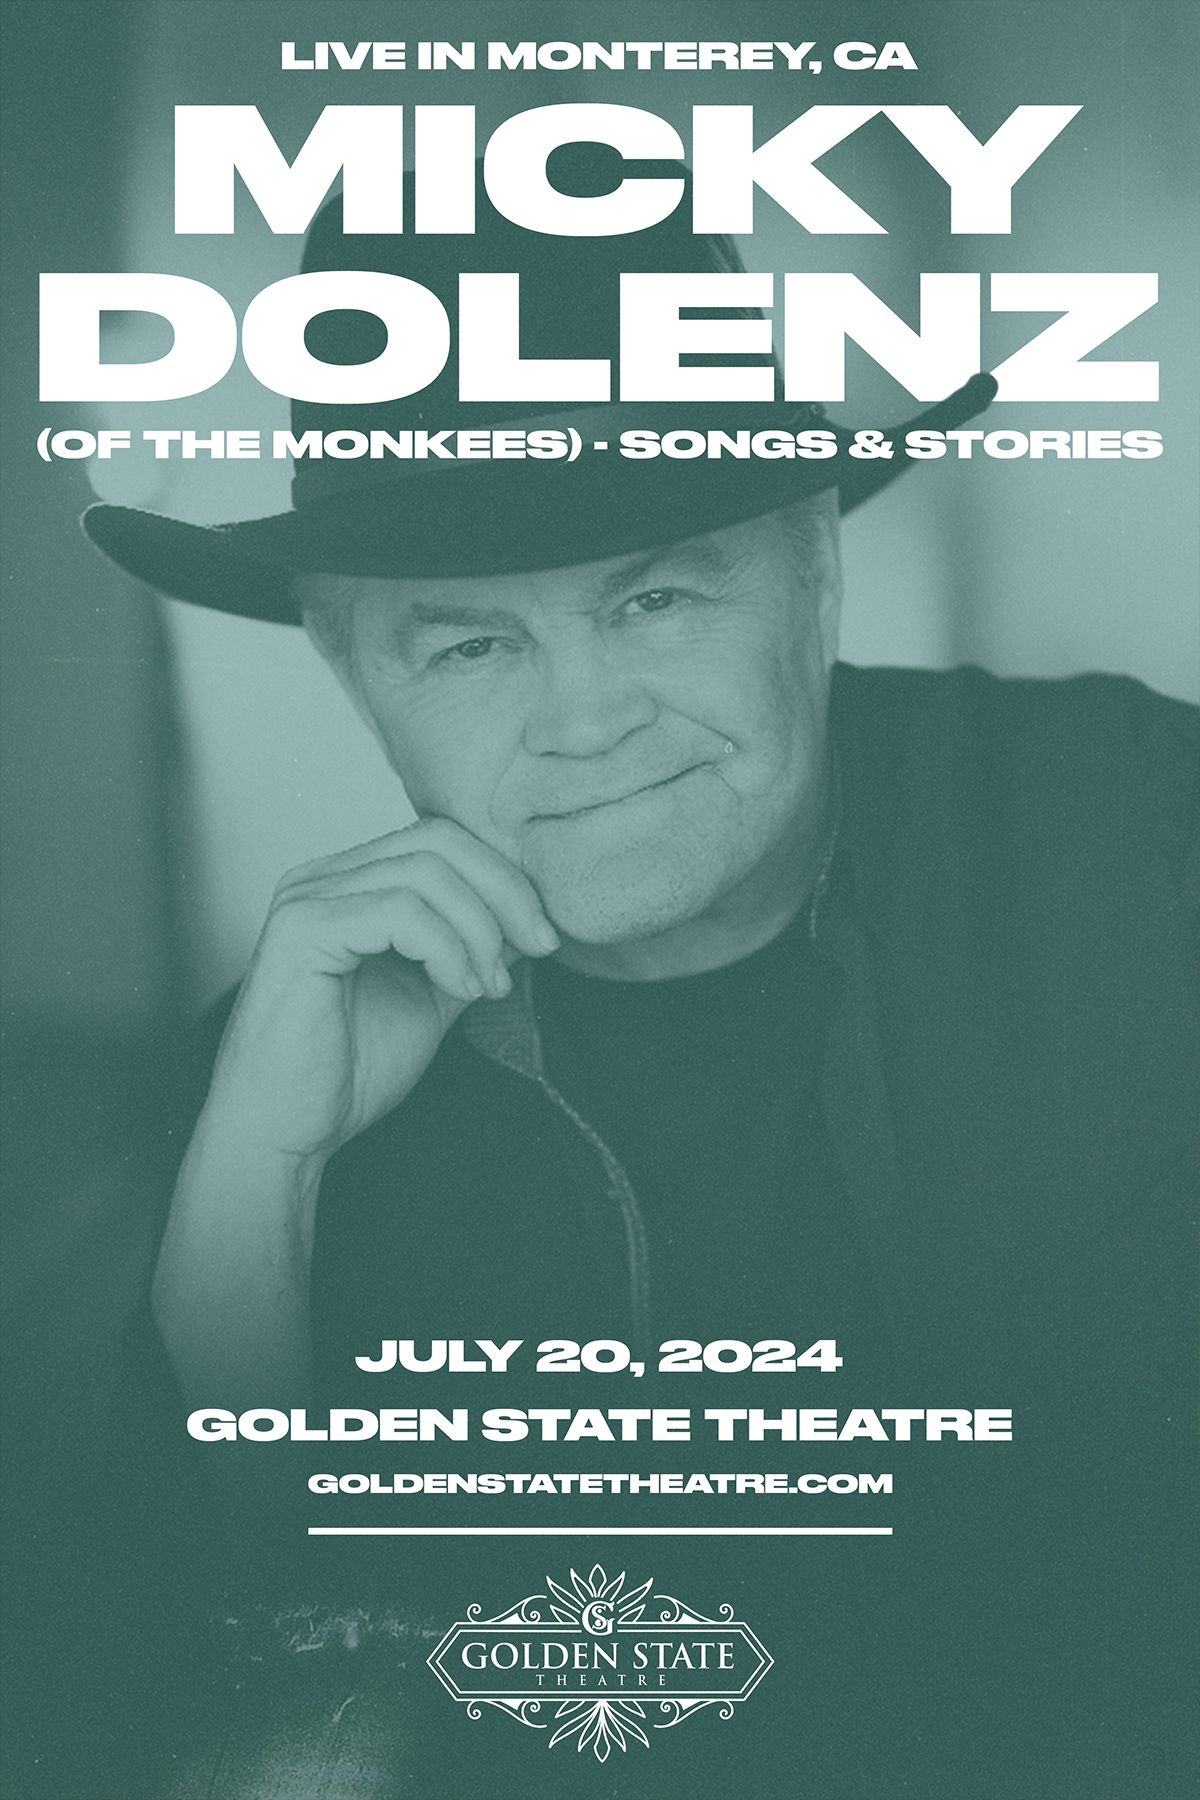 Micky Dolenz (Of The Monkees) - Songs & Stories